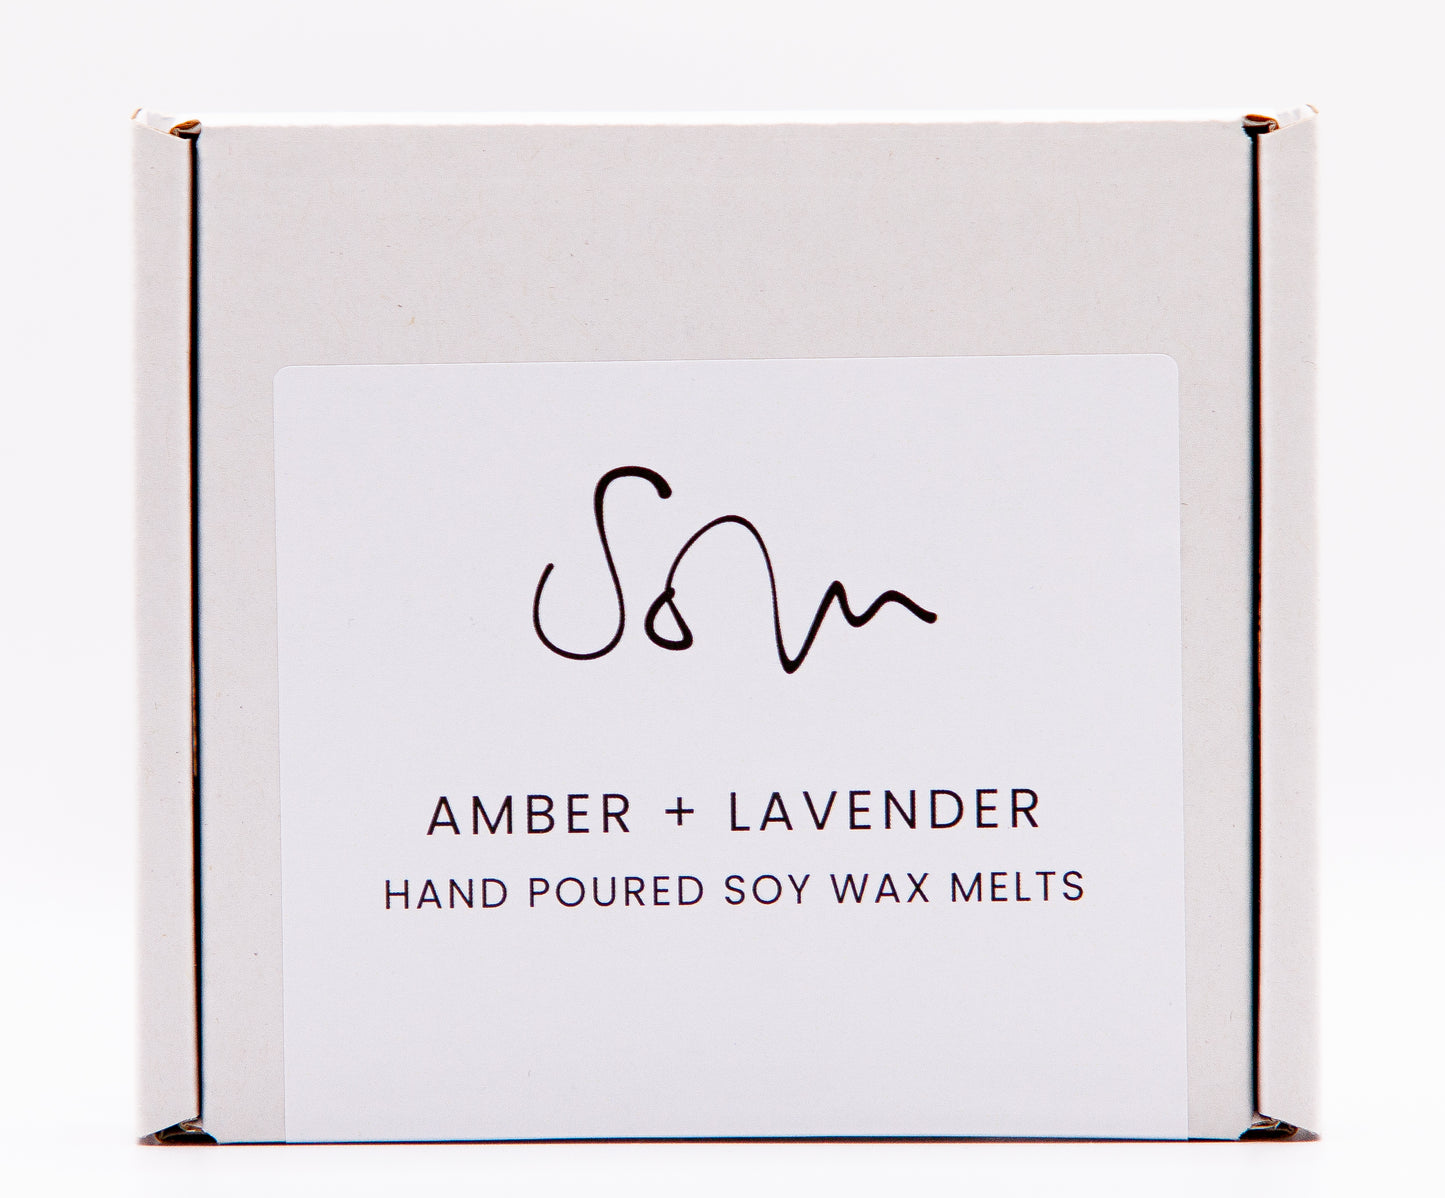 Amber and Lavender Wax Melt - Solu Candles